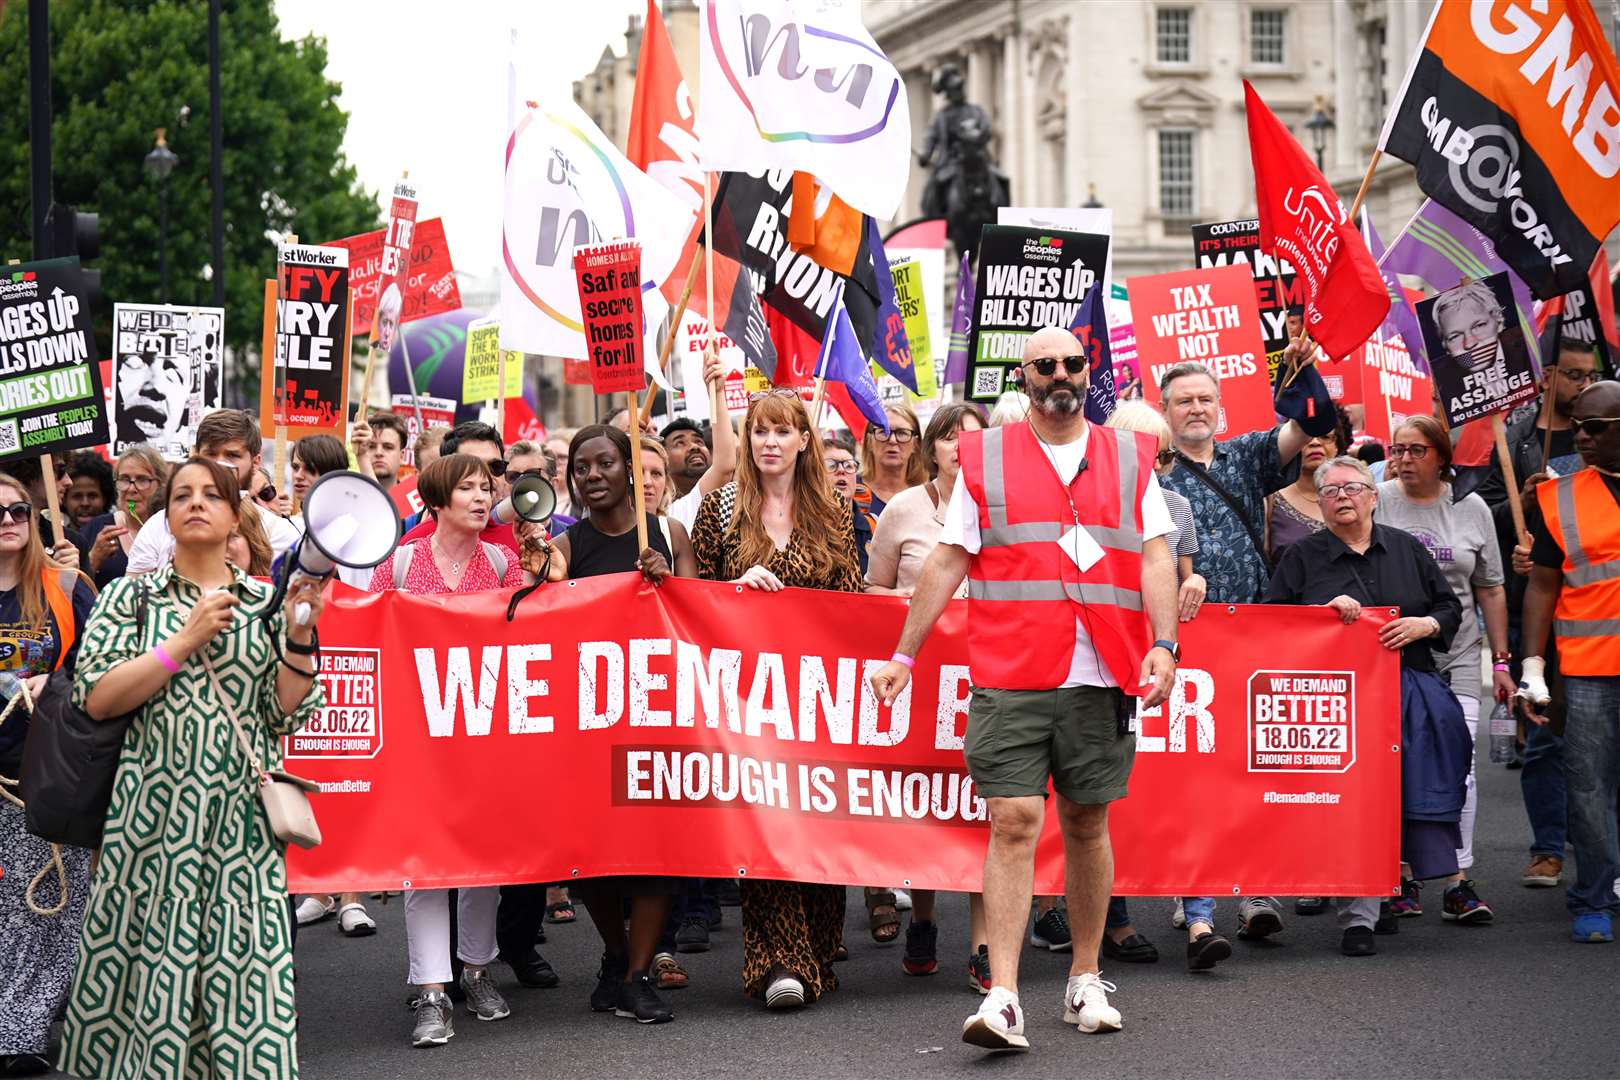 Labour Party deputy leader Angela Rayner (centre) takes part in a TUC national demonstration in central London (Yui Mok/PA)